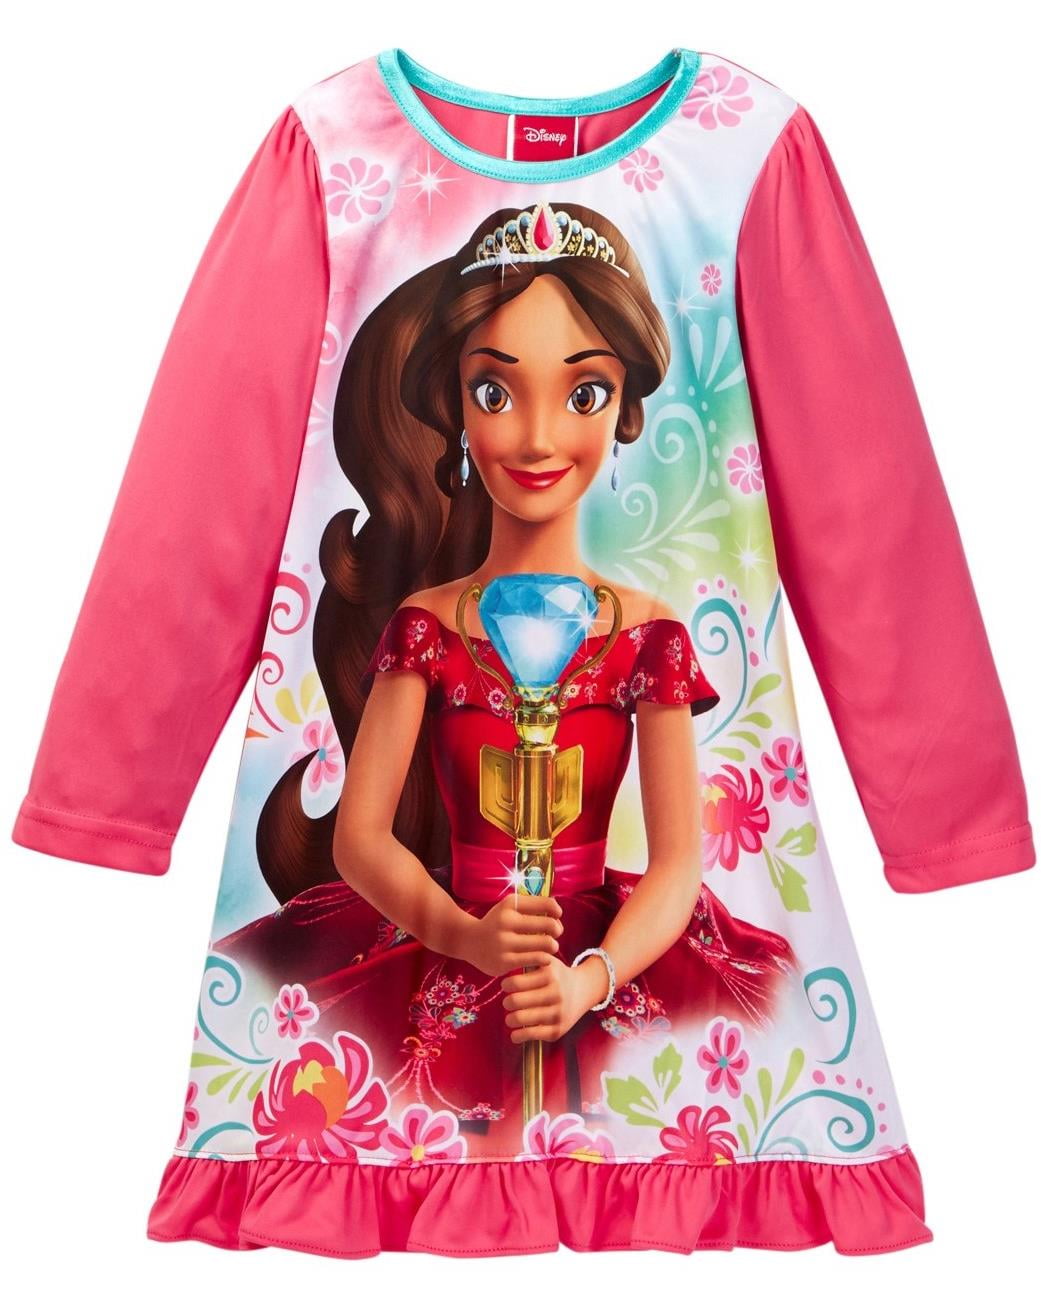 Disneys elena of avalor nightgown and 18" doll nightgown 